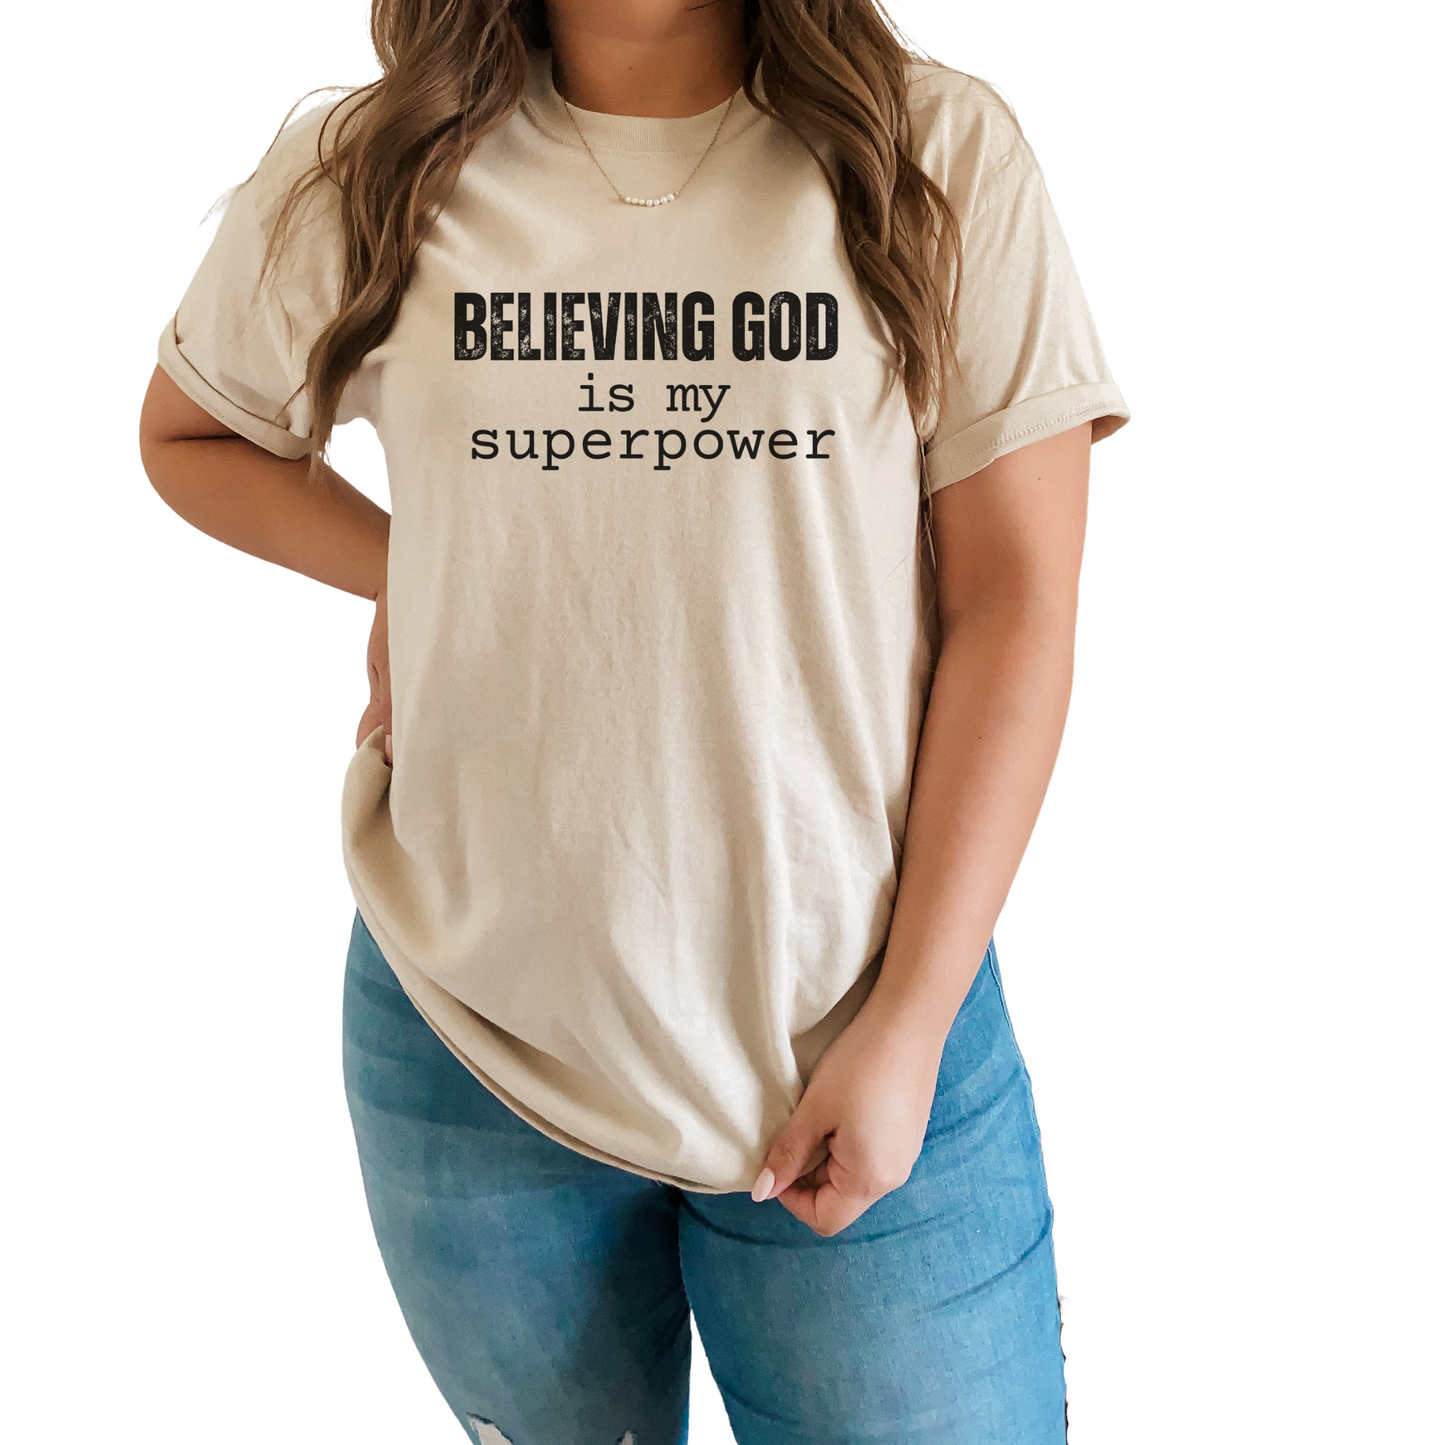 Believing God is My Superpower, Unisex T-Shirt, Faith Based, Christian Streetwear